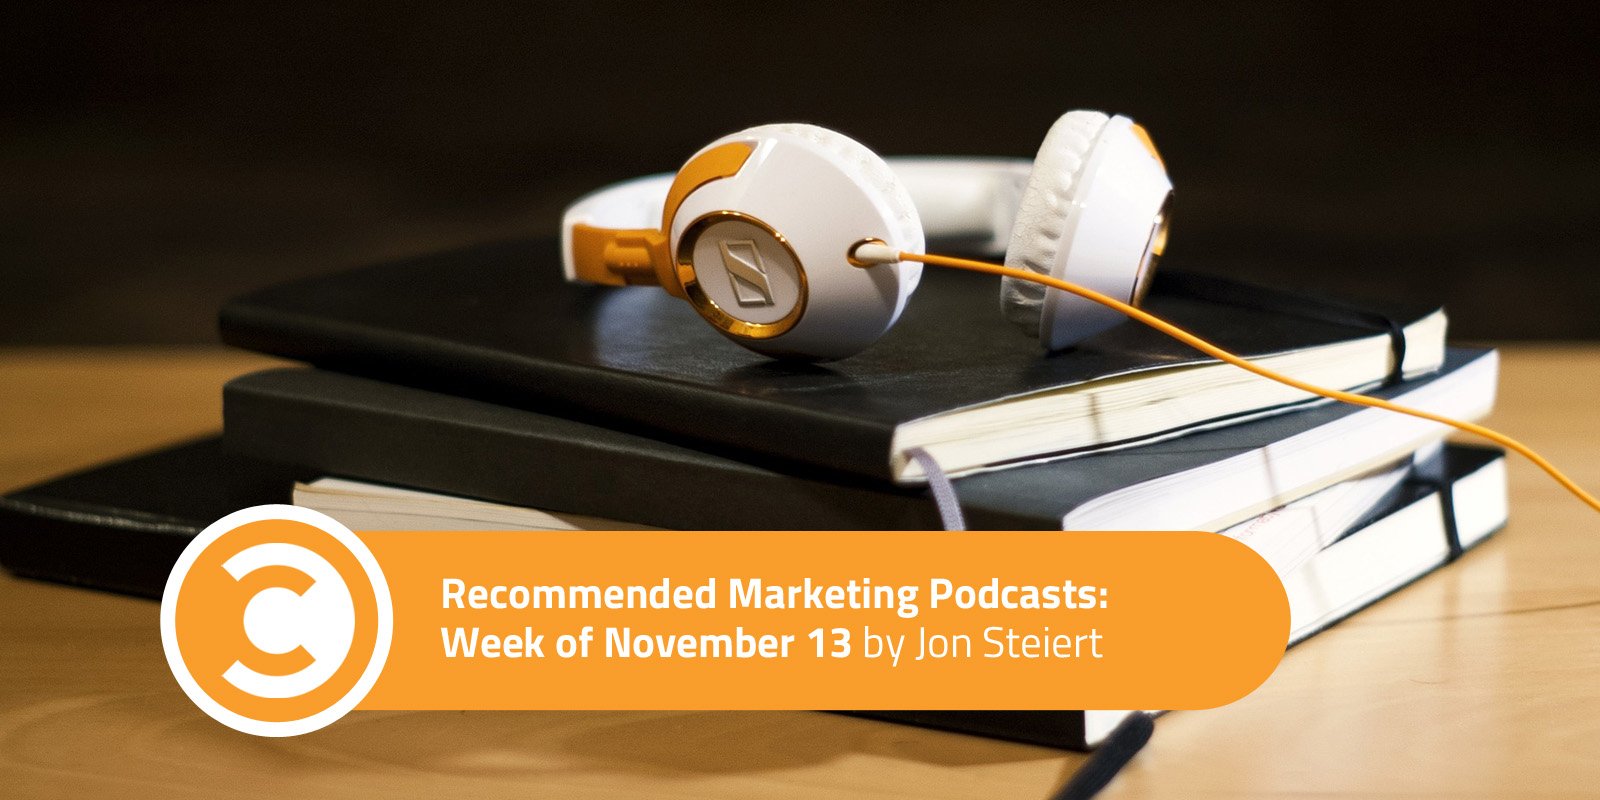 Recommended Marketing Podcasts Week of November 13